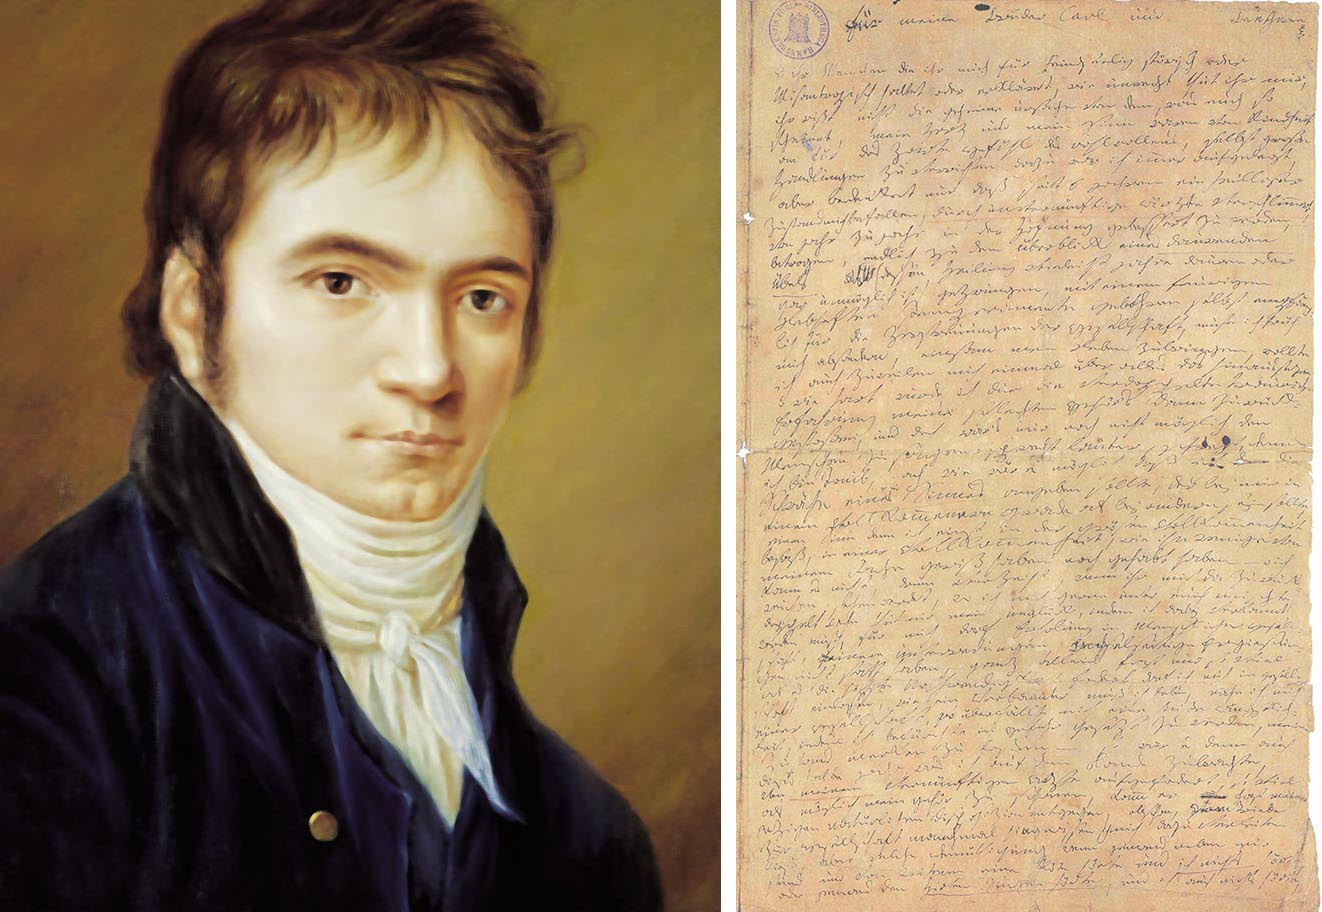 (left) Beethoven in his early thirties. Blue jacket, white scarf, looking directly at the viewer. (right) Letter by Beethoven, in his distinctively messy handwriting.  